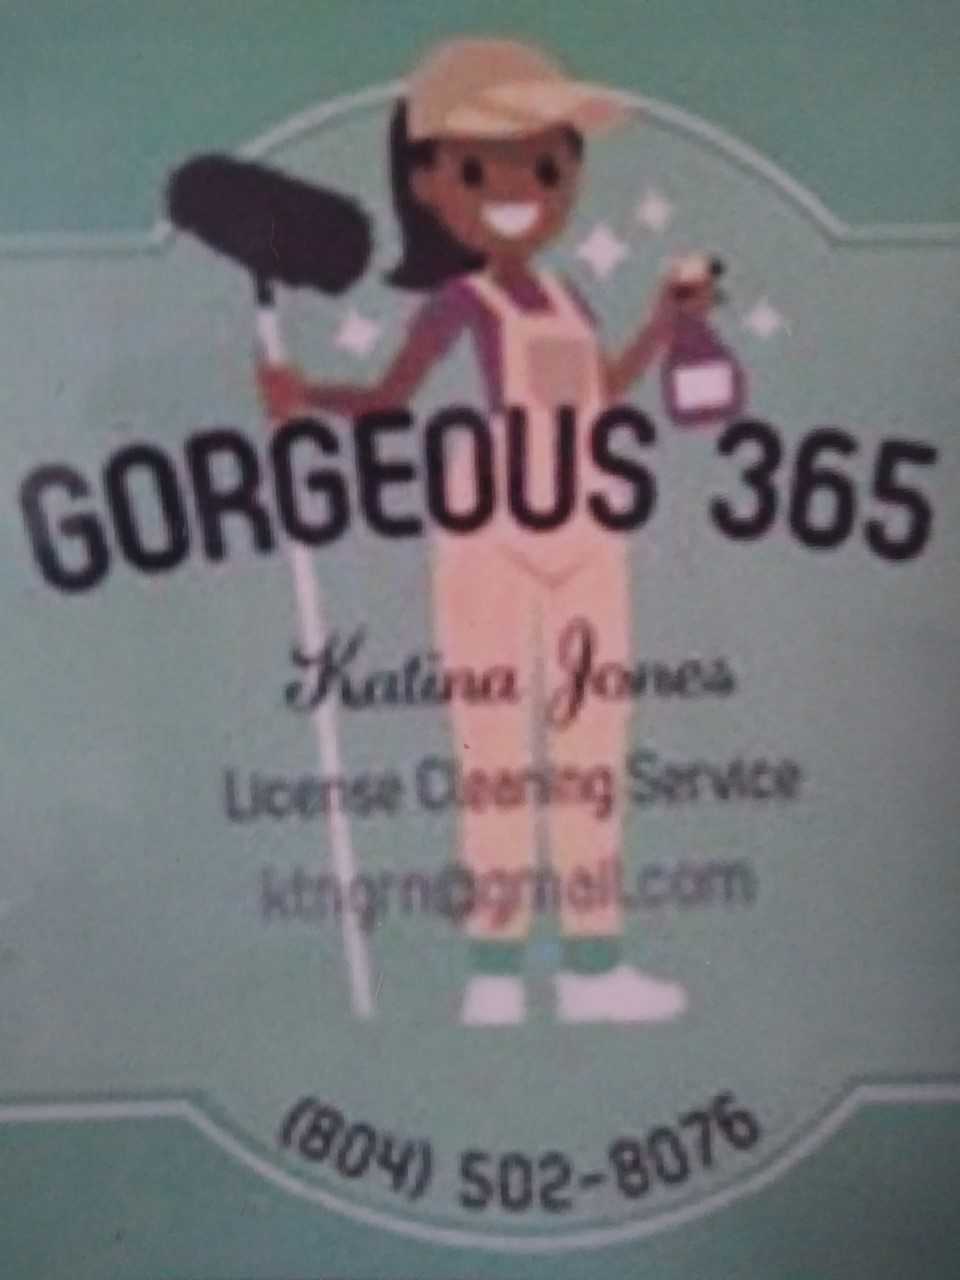 Gorgeous 365 License Cleaning Service Logo